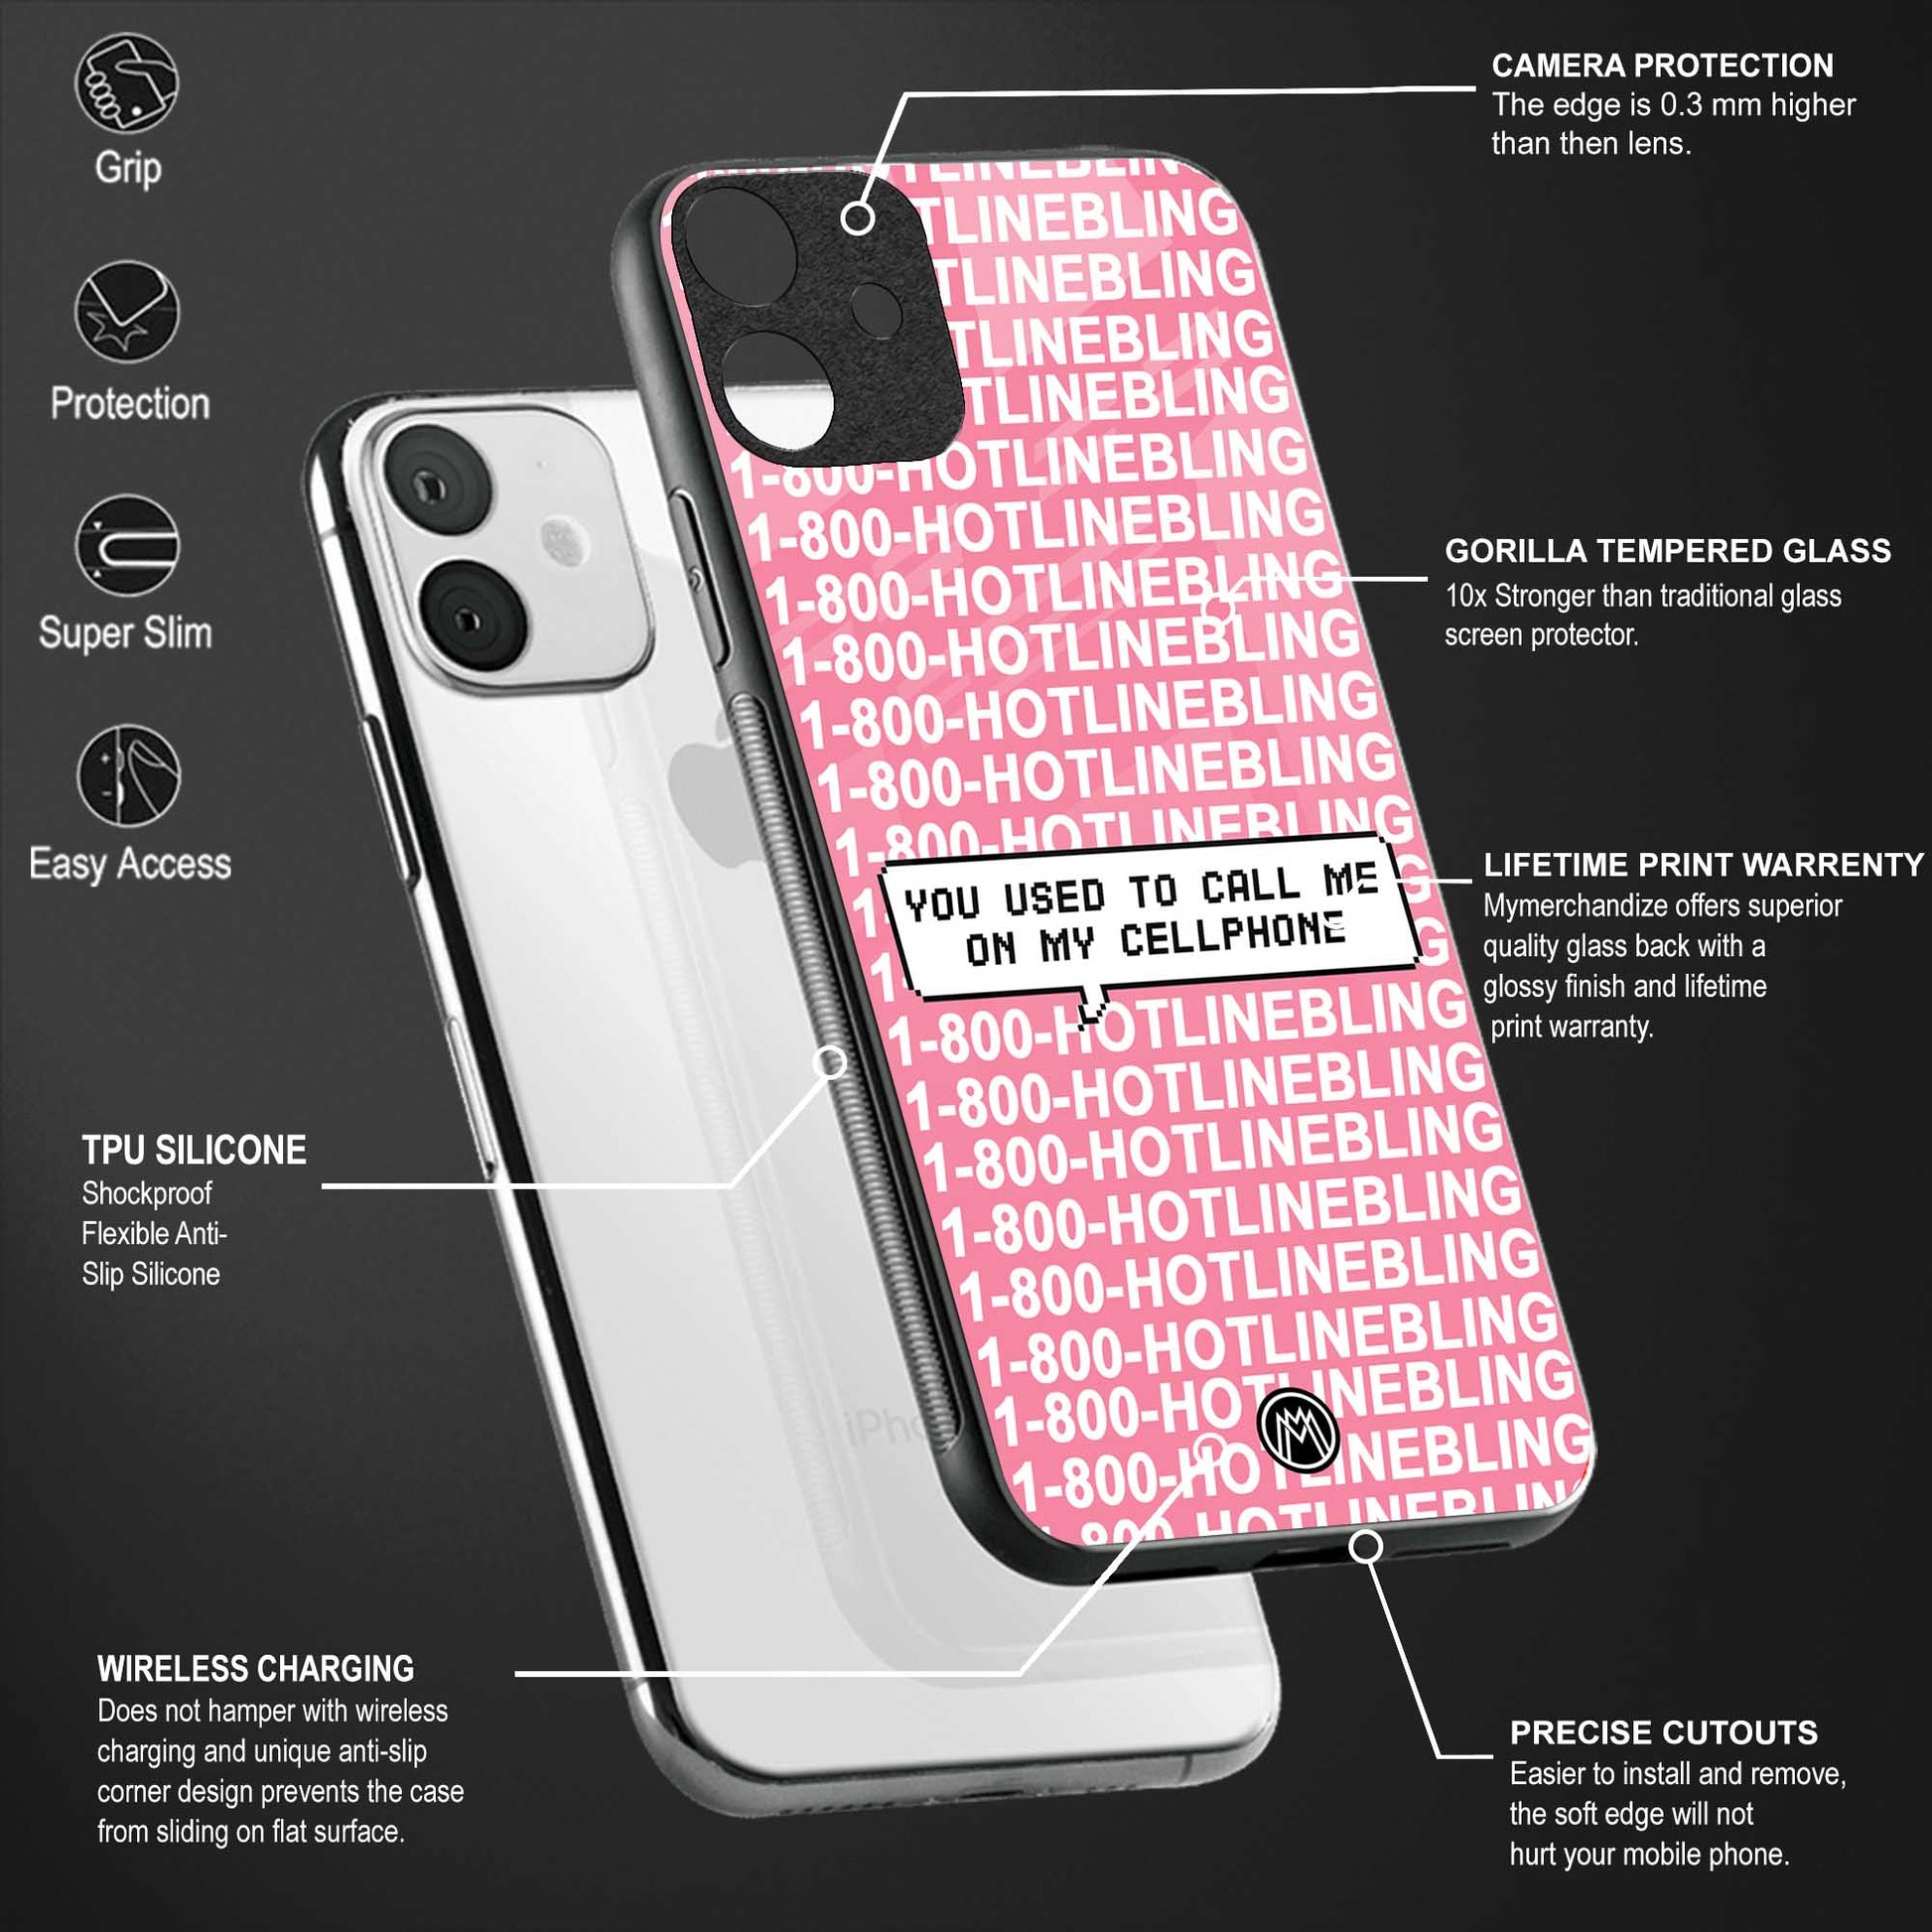 1800 hotline bling phone cover for samsung a21 